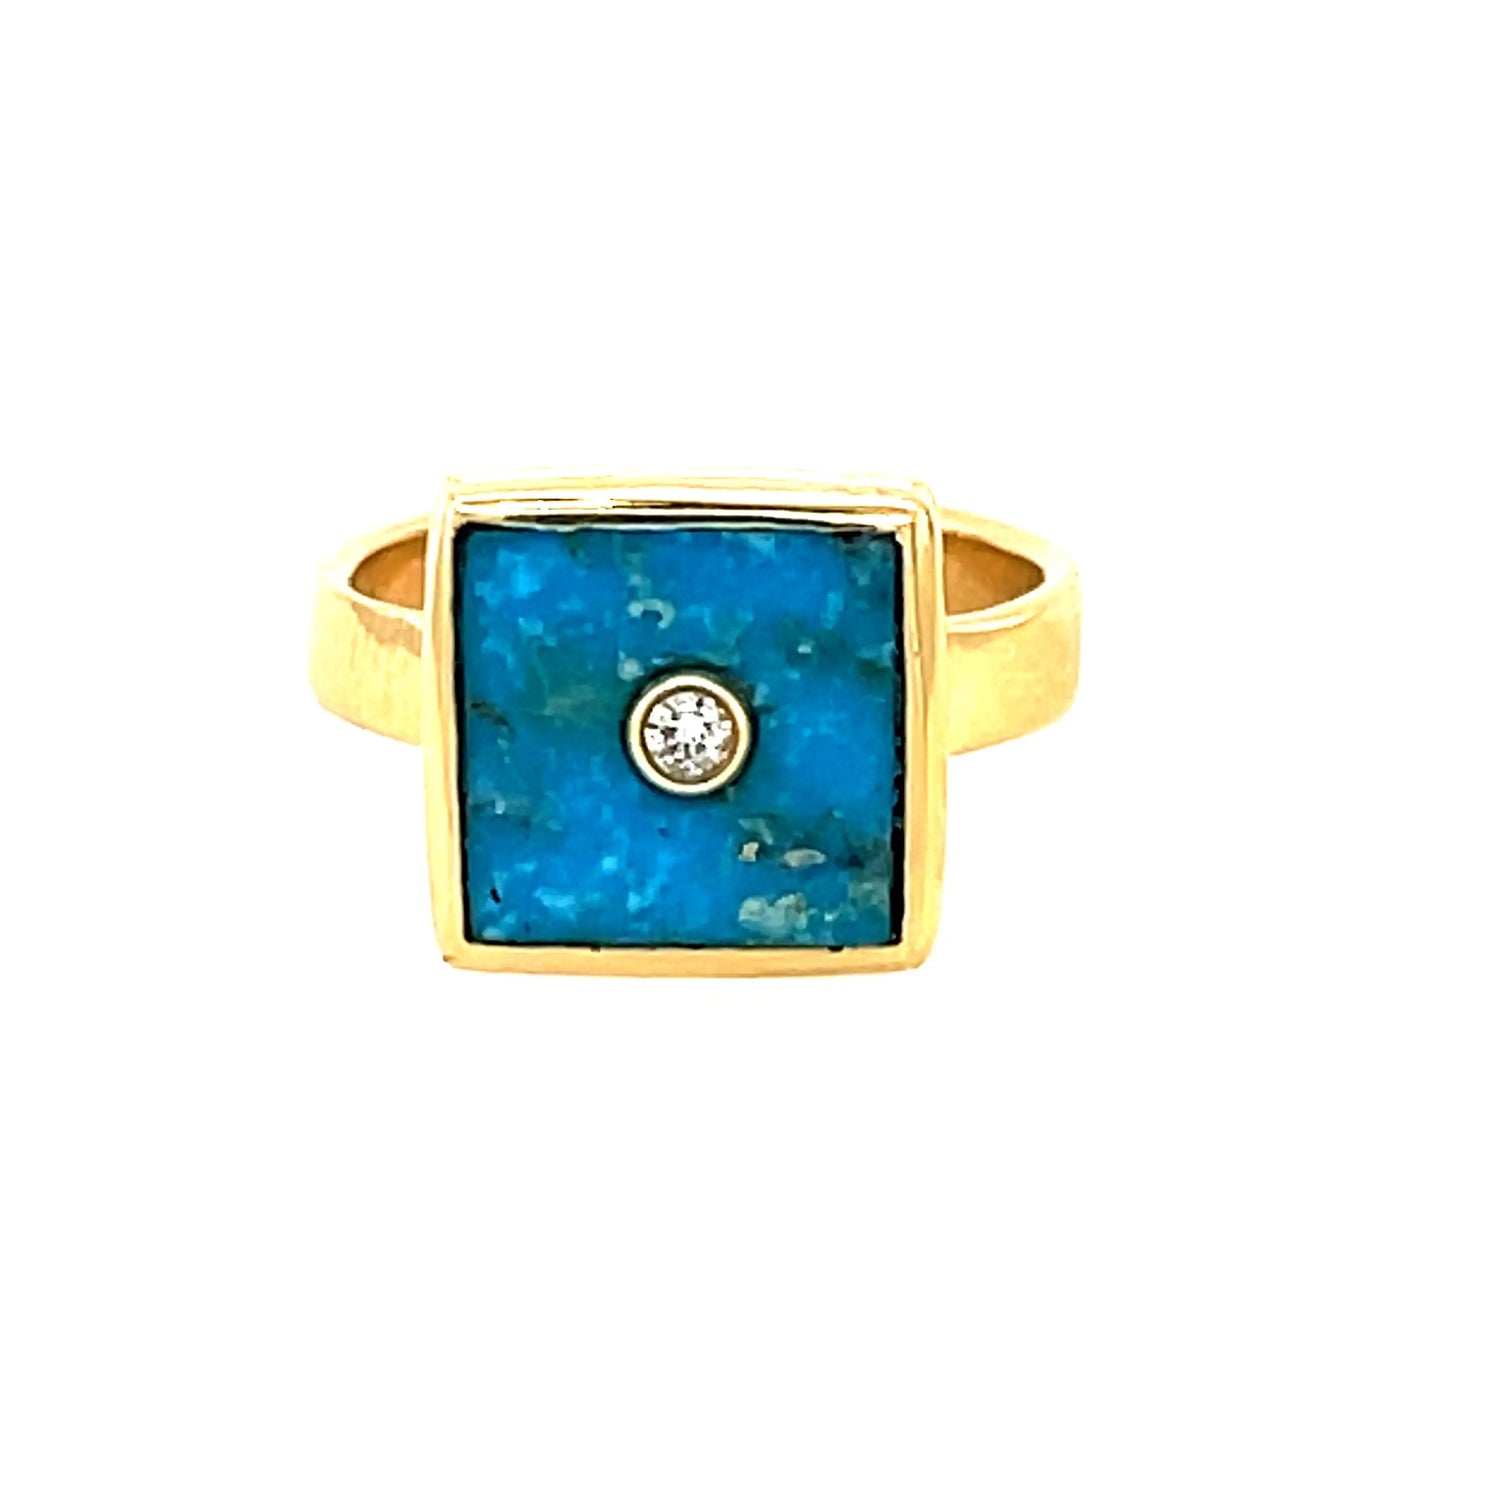 An amazing one of a kind turquoise ring!  14k yellow gold Turquoise and diamond ring  Size 6.25  Exclusive from Stevie's Jewel Box